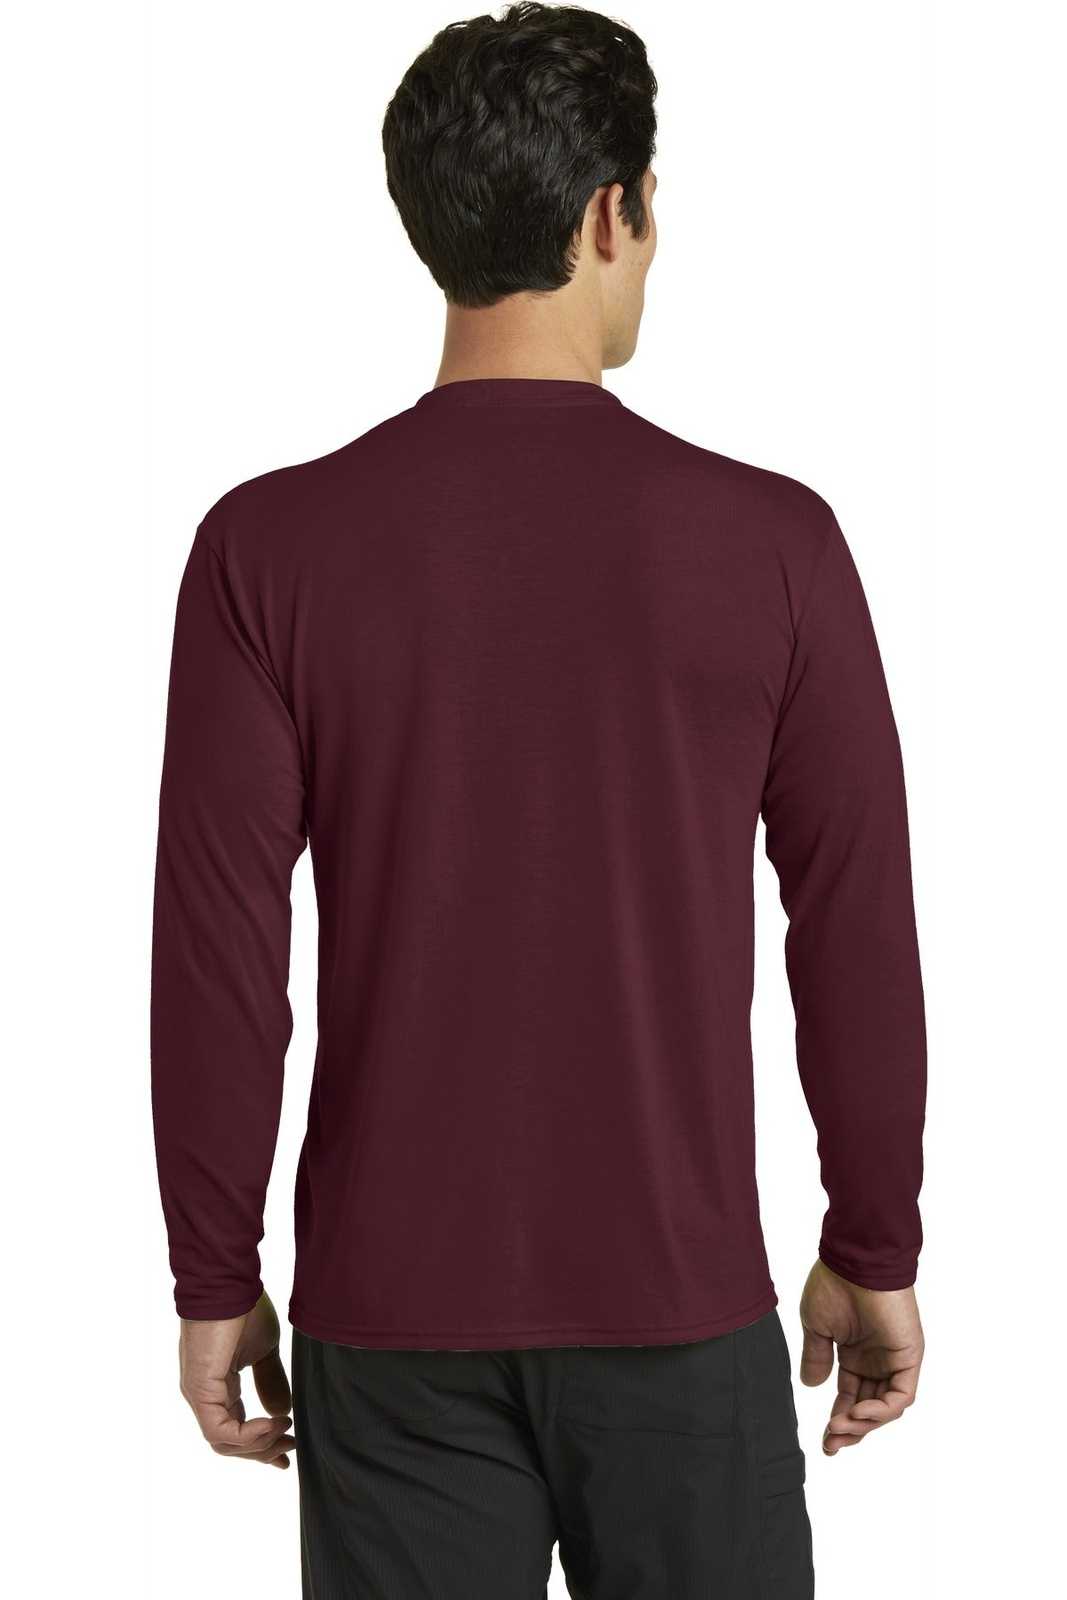 Port &amp; Company PC381LS Long Sleeve Performance Blend Tee - Athletic Maroon - HIT a Double - 2